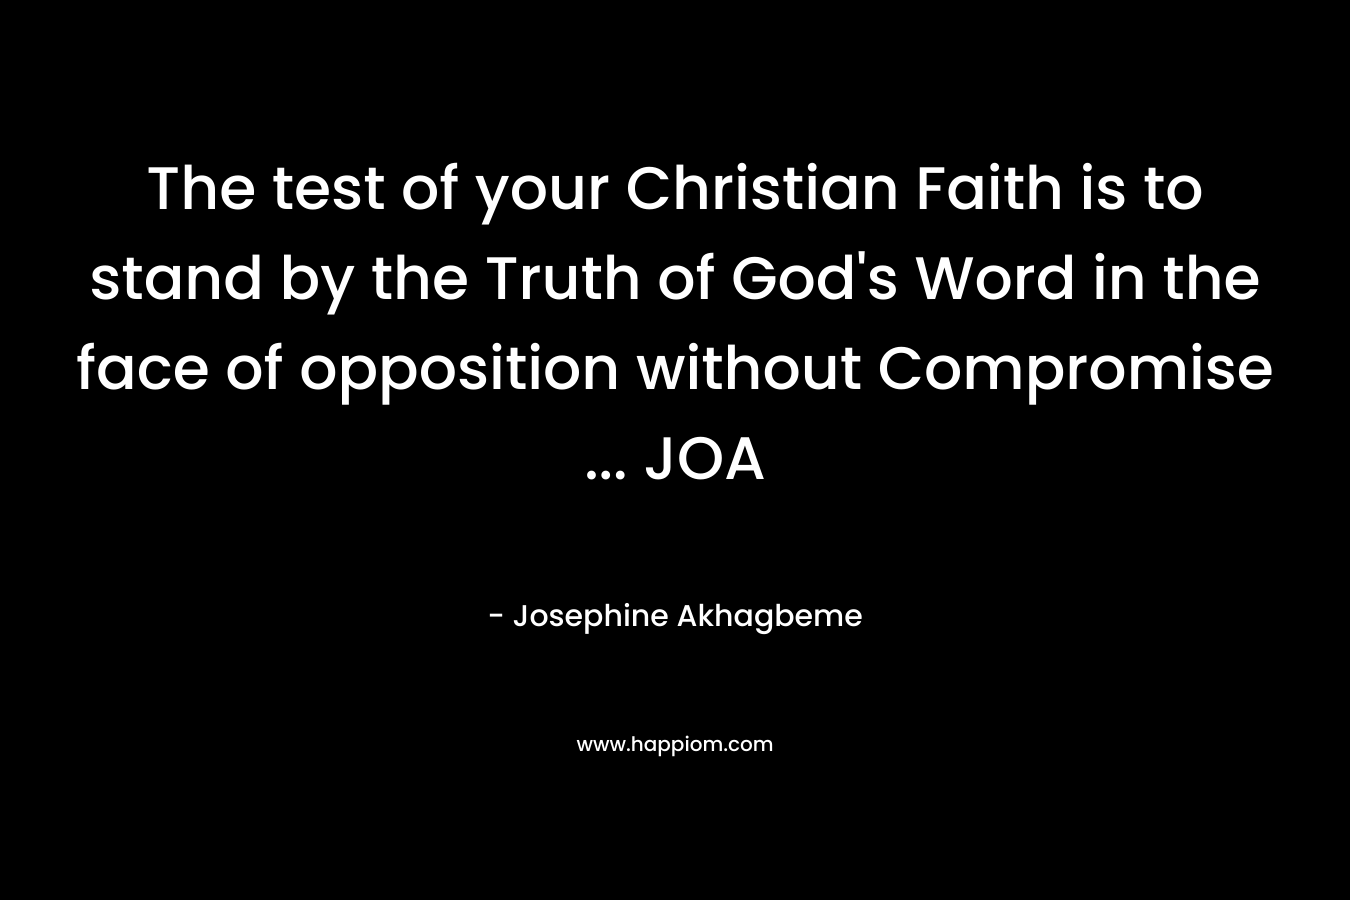 The test of your Christian Faith is to stand by the Truth of God’s Word in the face of opposition without Compromise … JOA – Josephine Akhagbeme